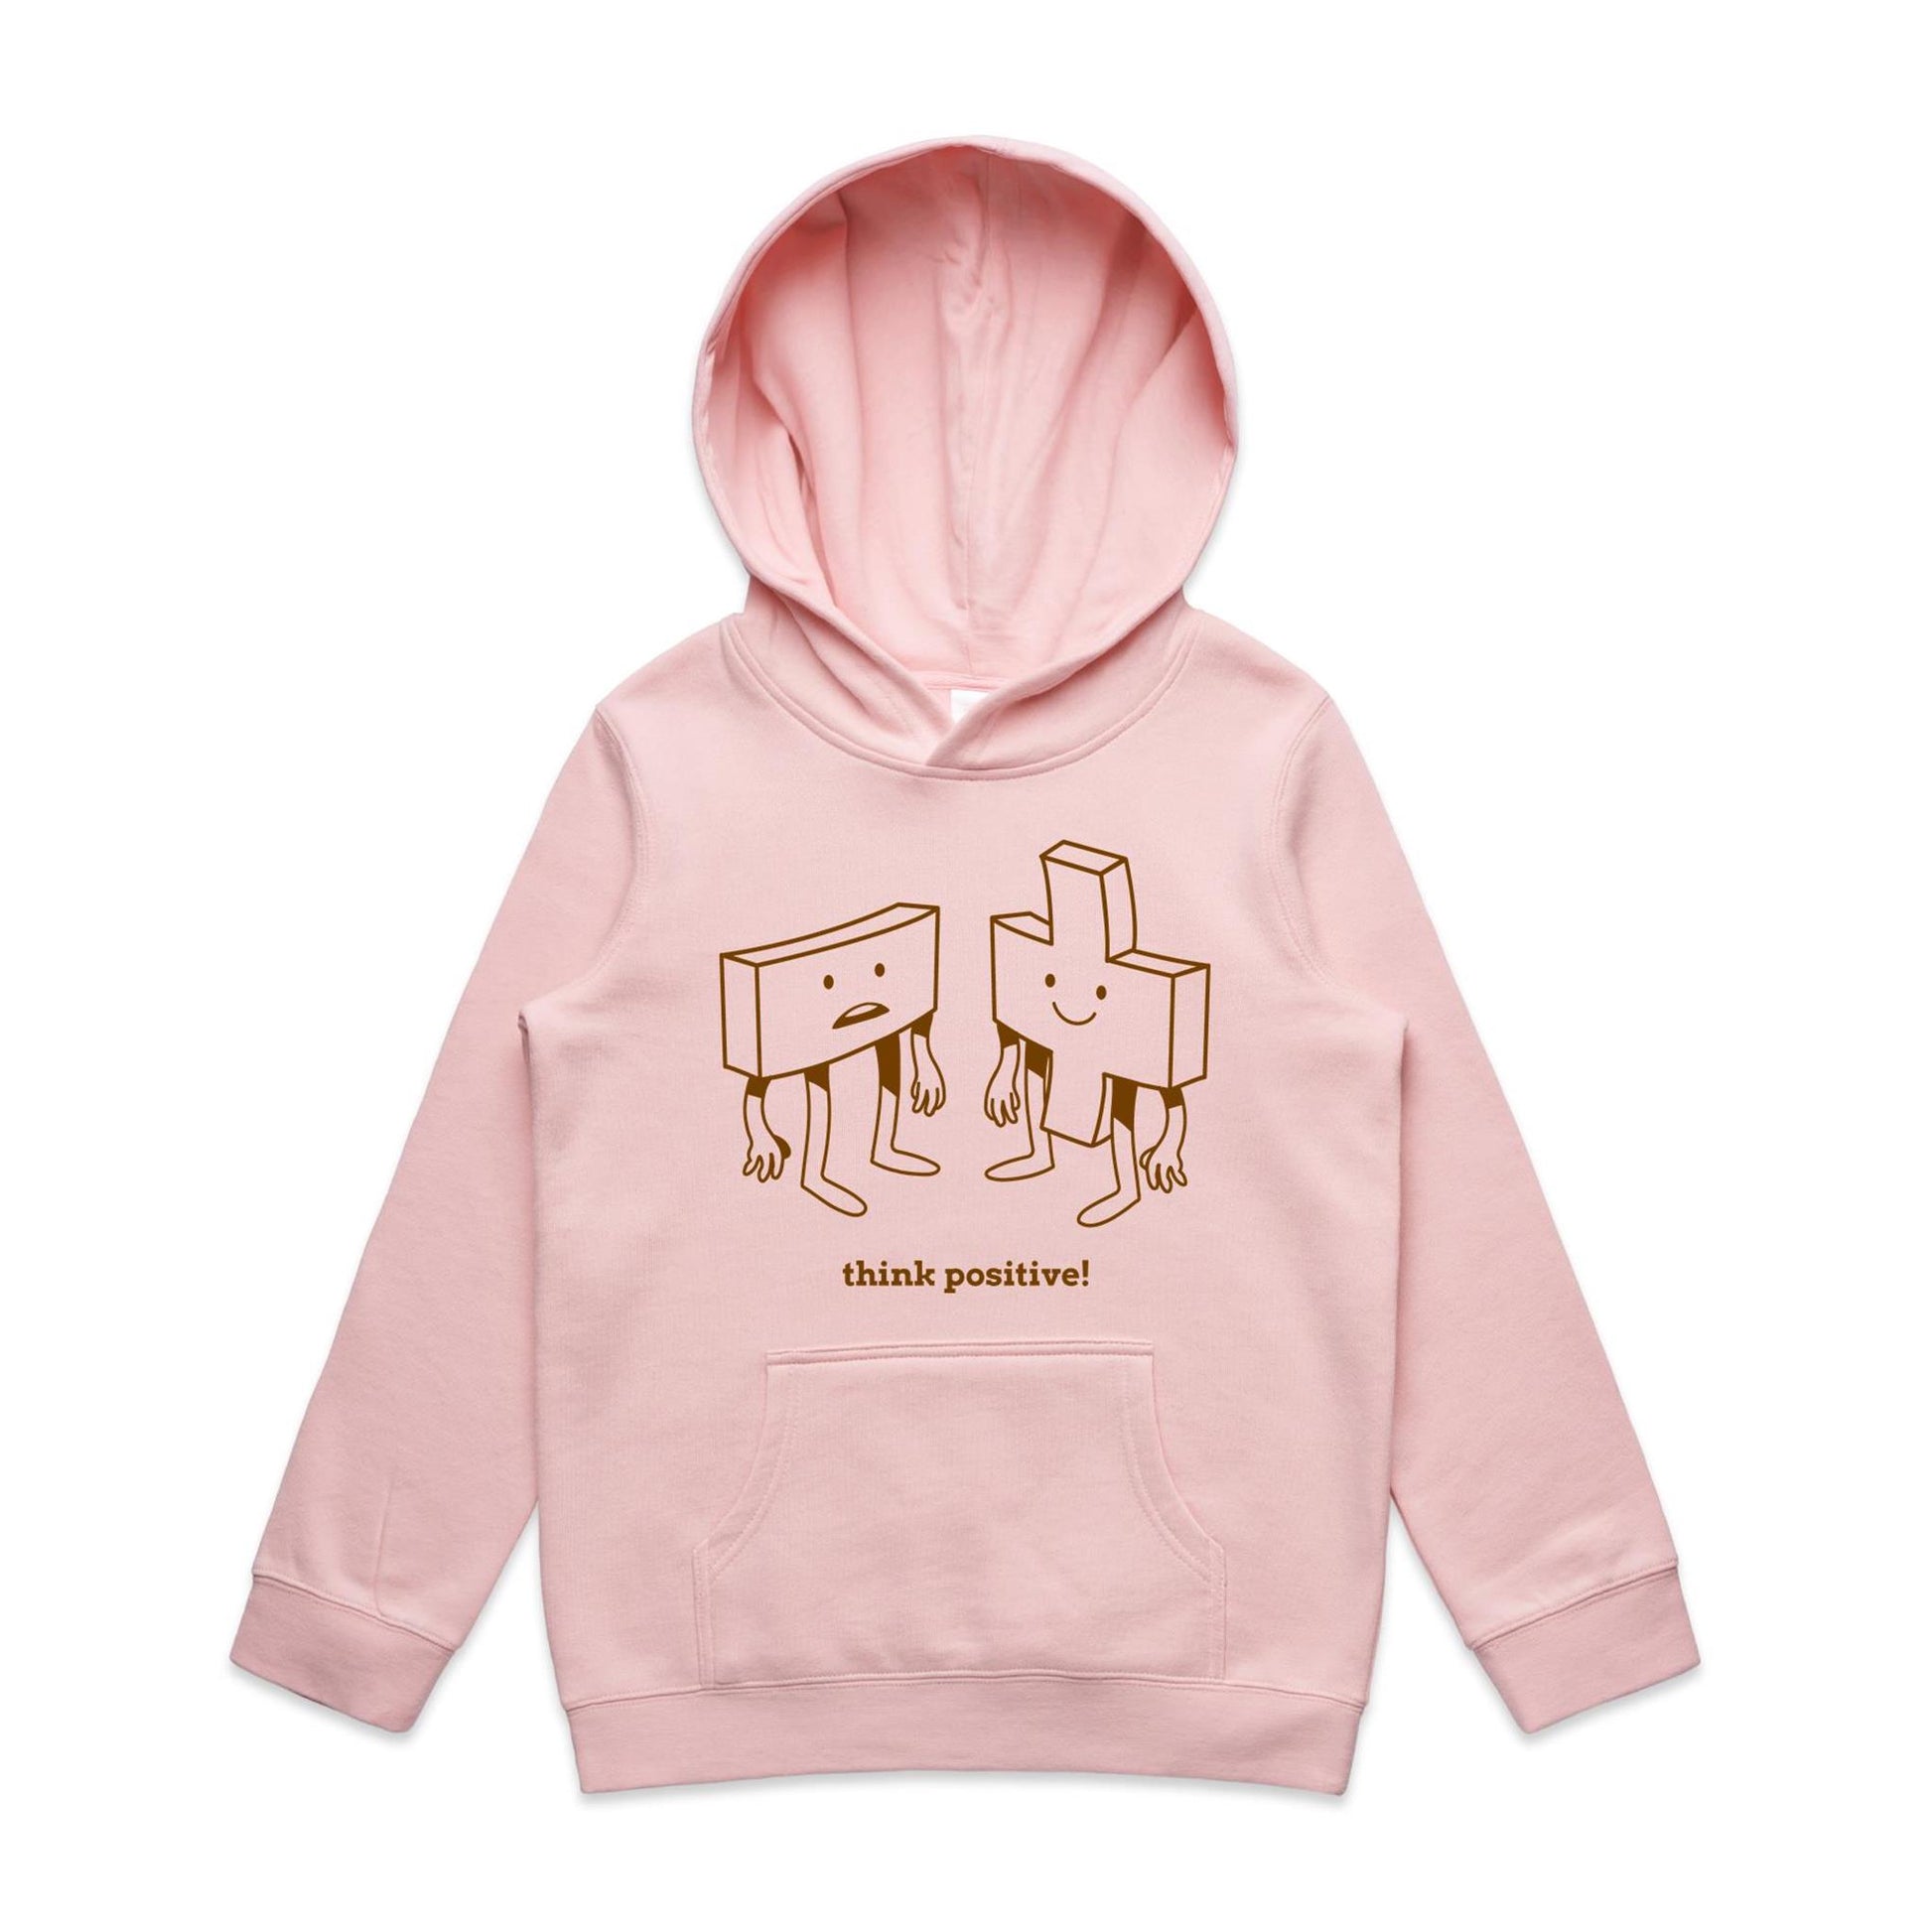 Think Positive, Plus And Minus - Youth Supply Hood Pink Kids Hoodie Maths Motivation